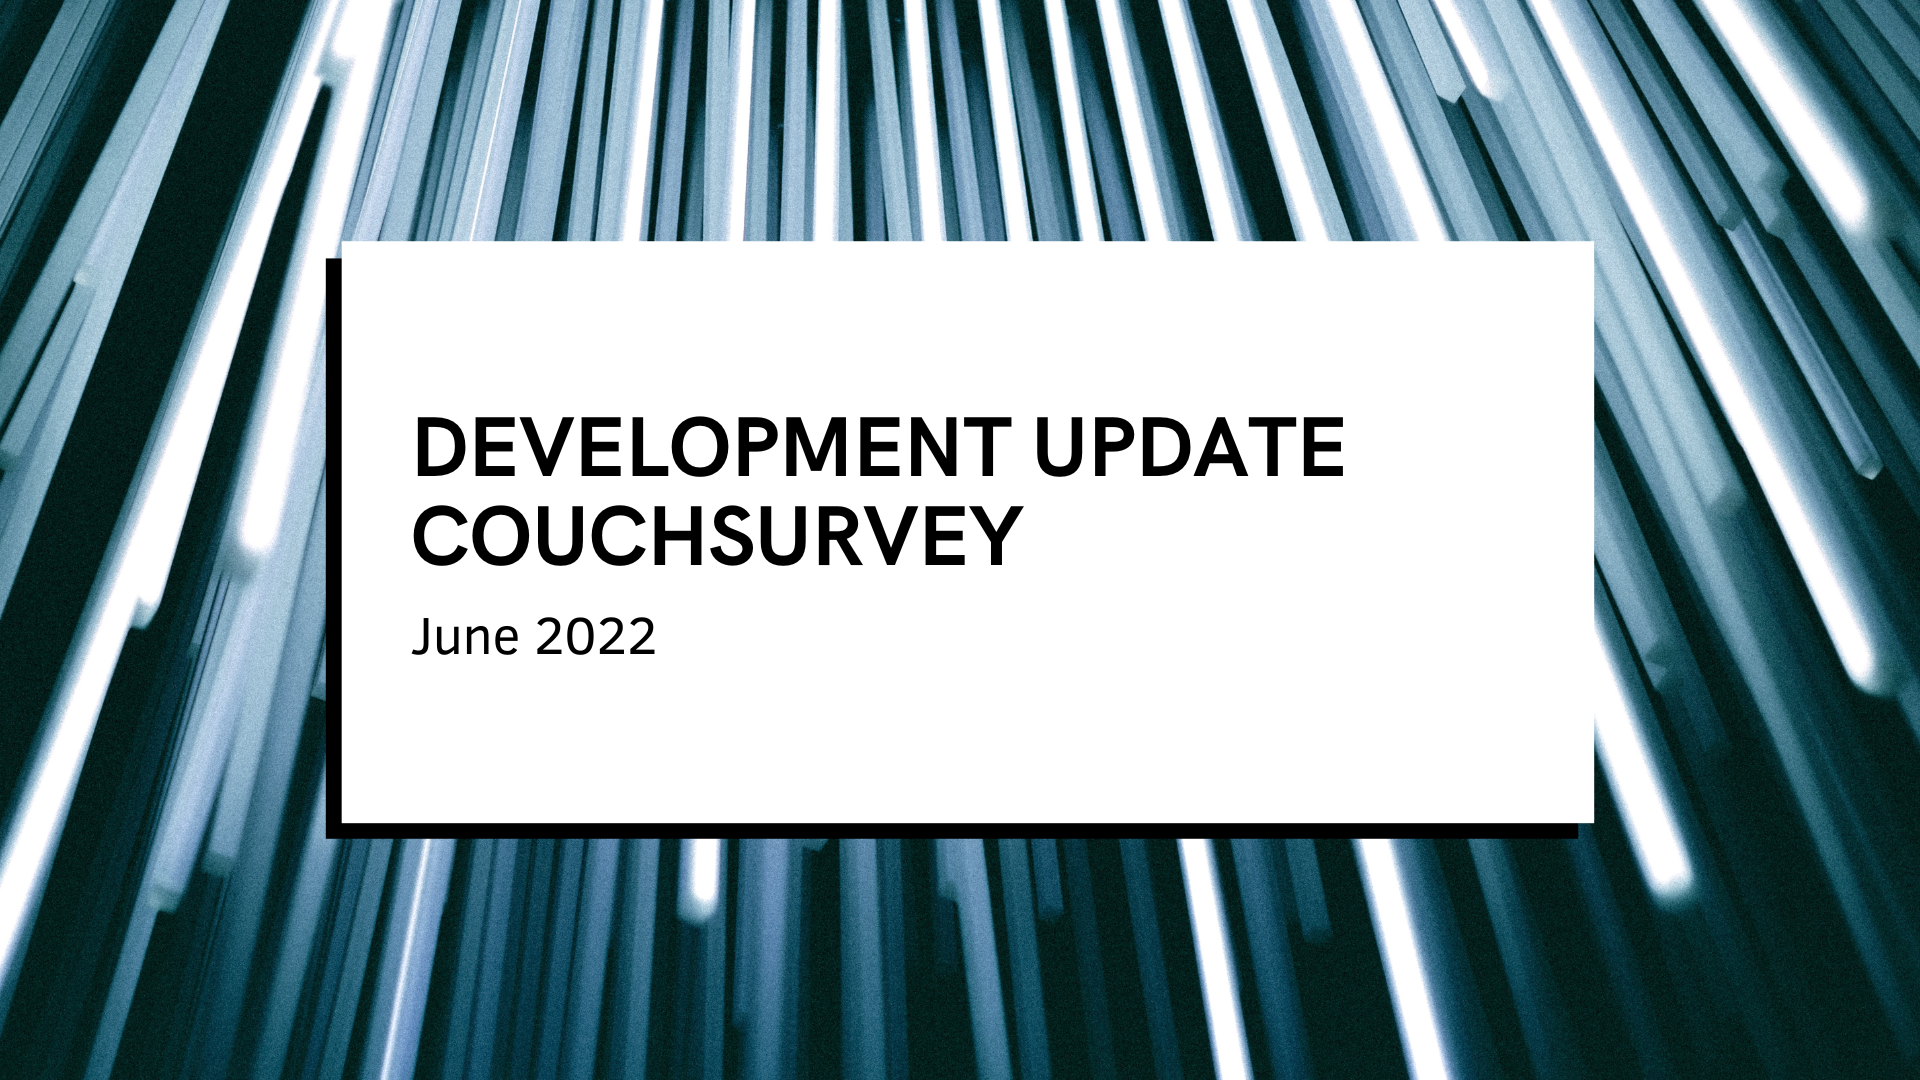 Development update — What happened on couchsurvey in June 2022?